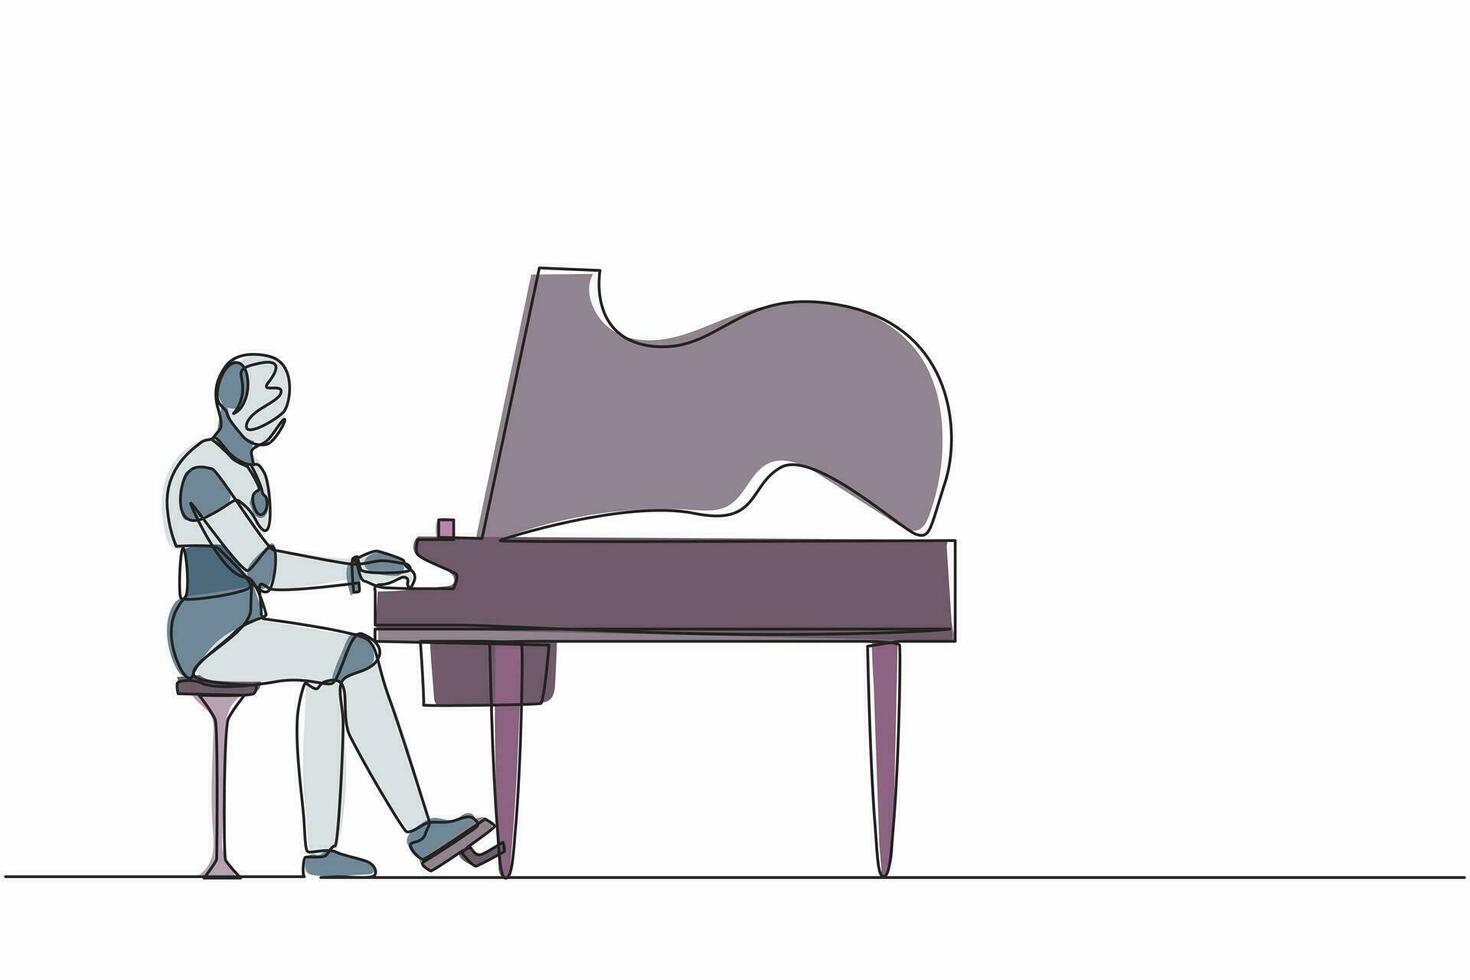 Single continuous line drawing robot sitting and playing grand piano on stage. Modern robotic artificial intelligence. Electronic technology industry. One line draw graphic design vector illustration